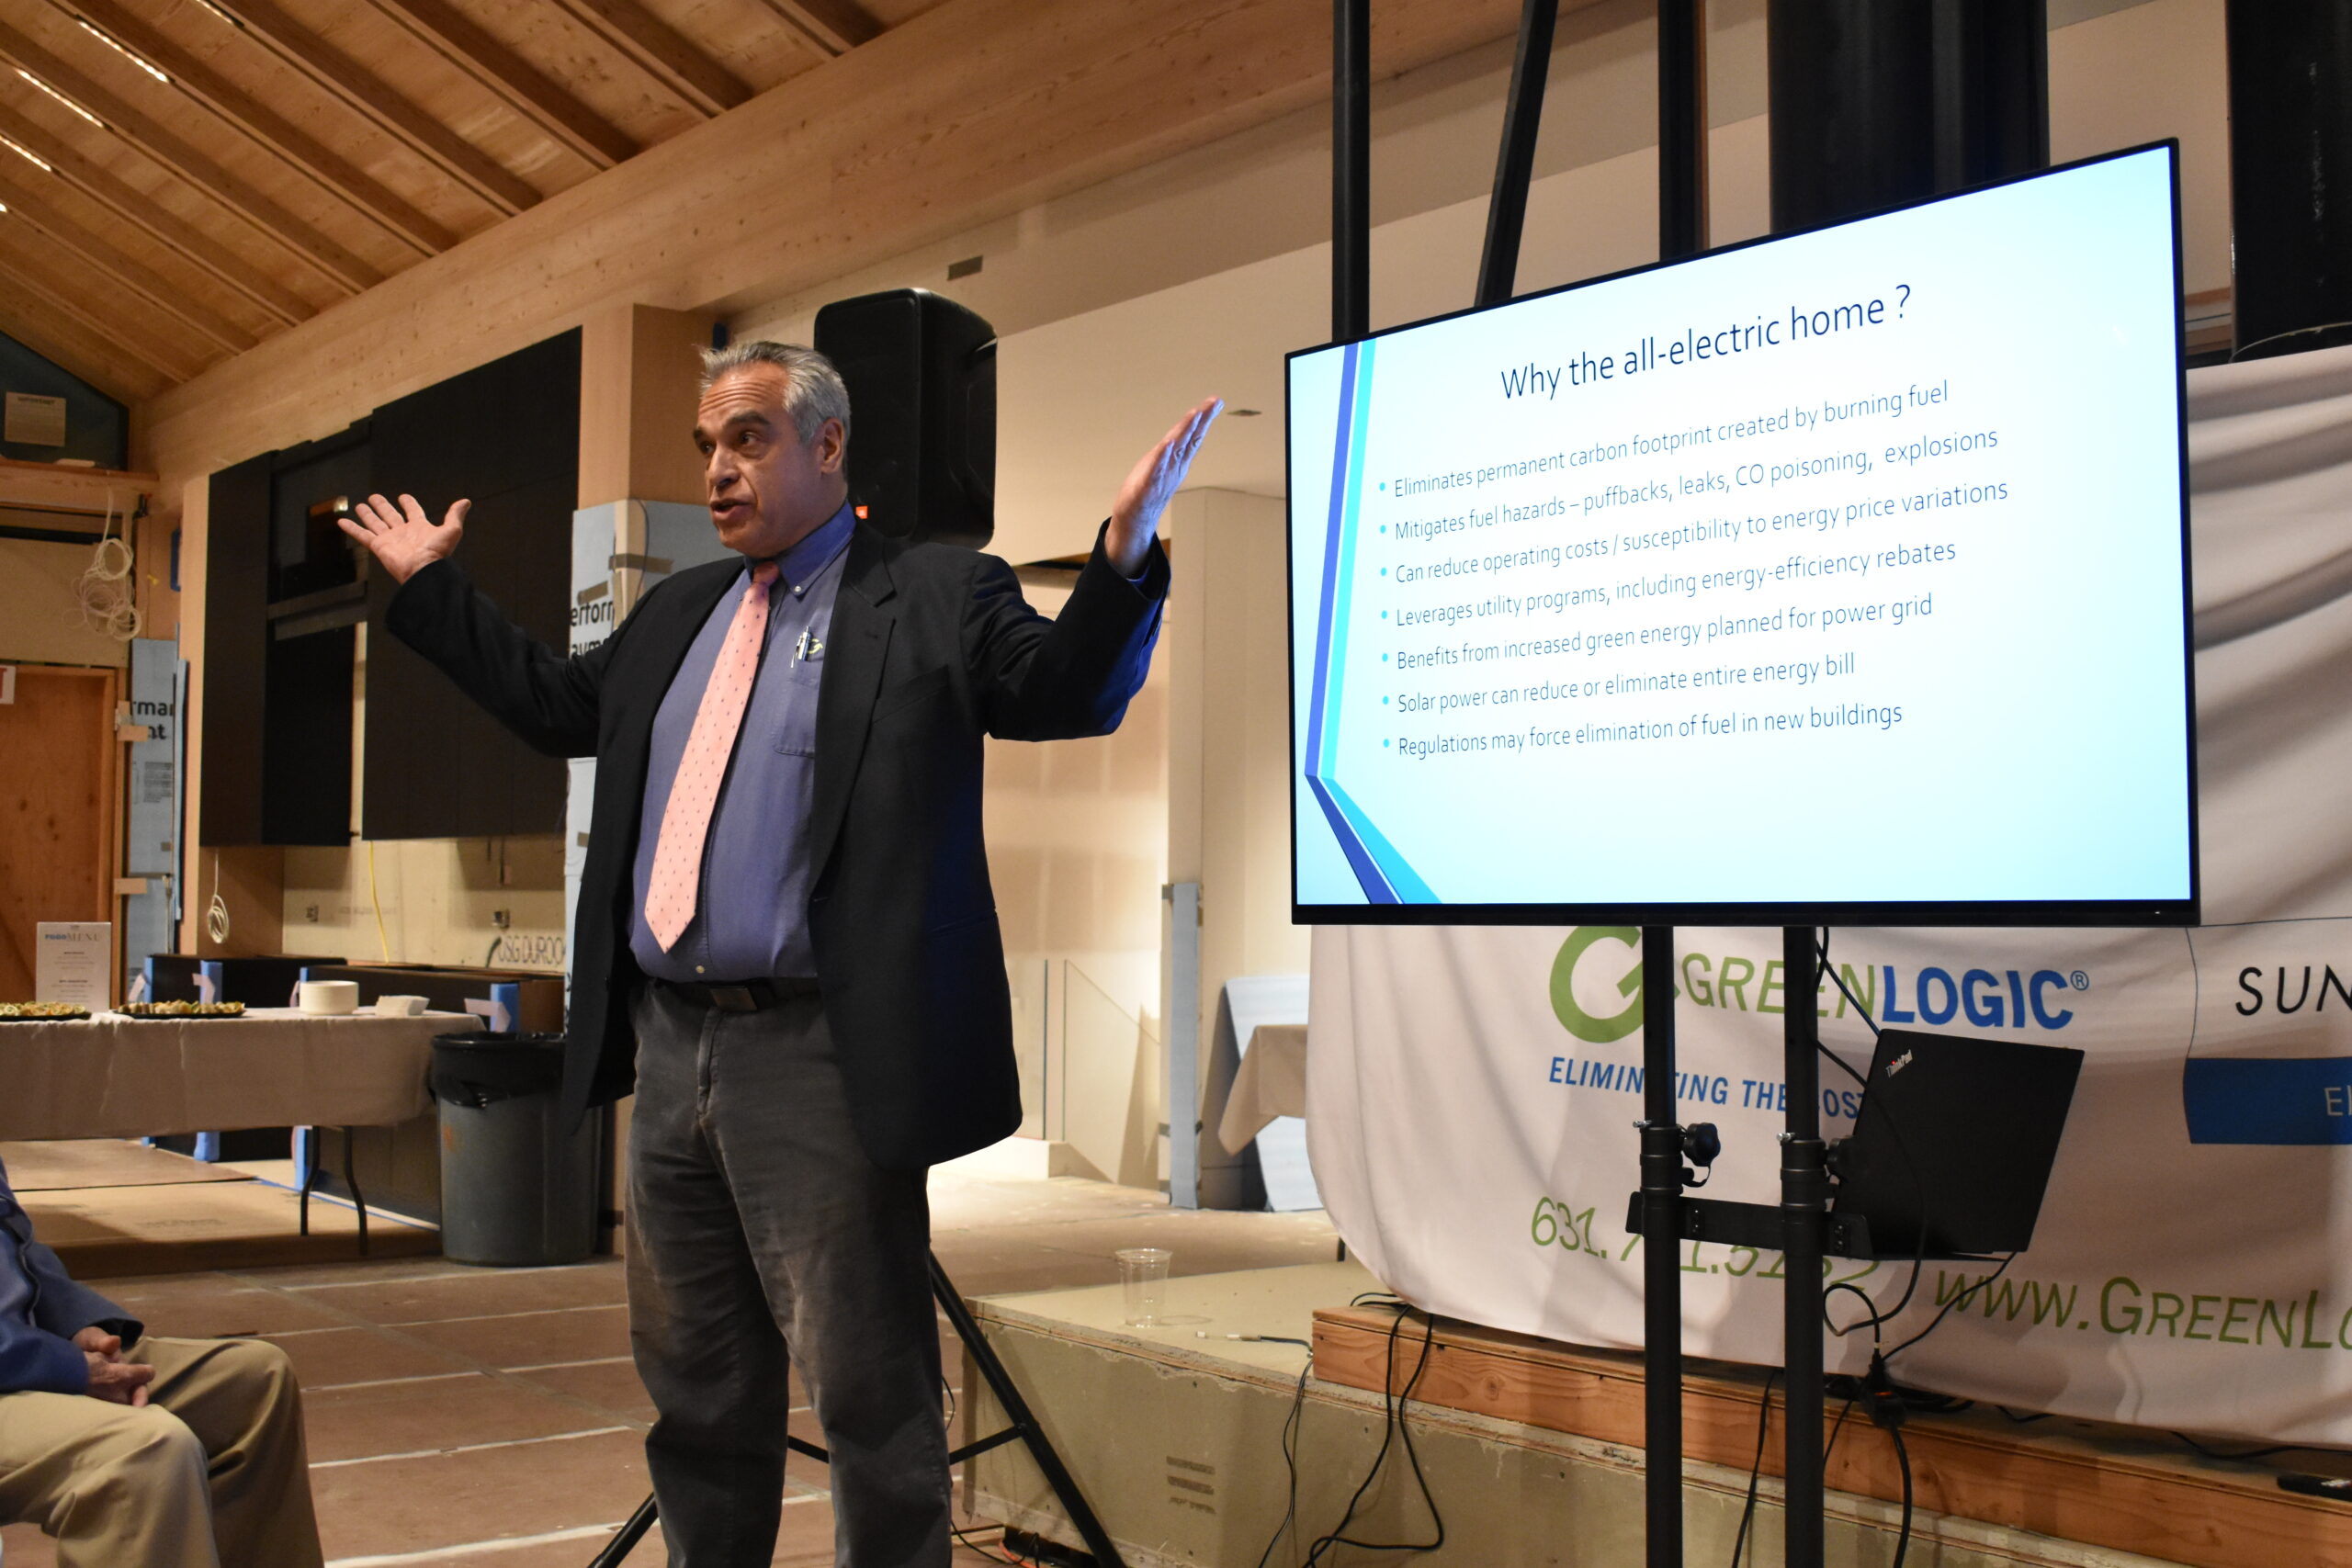 Jean Pierre Clejan of GreenLogic Energy presents The All-Electric Home of the 21st Century at the Potato Barn in Sagaponack. BRENDAN J. O'REILLY